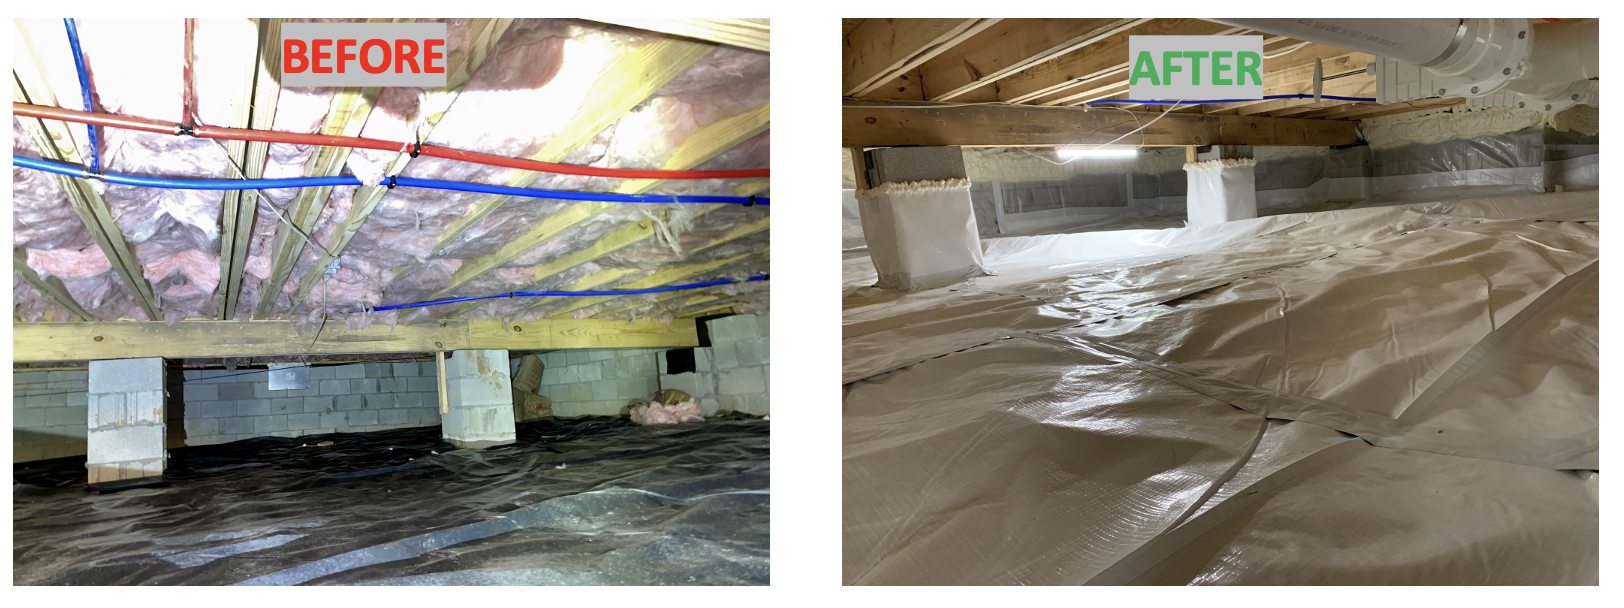 Crawlspace, before and after